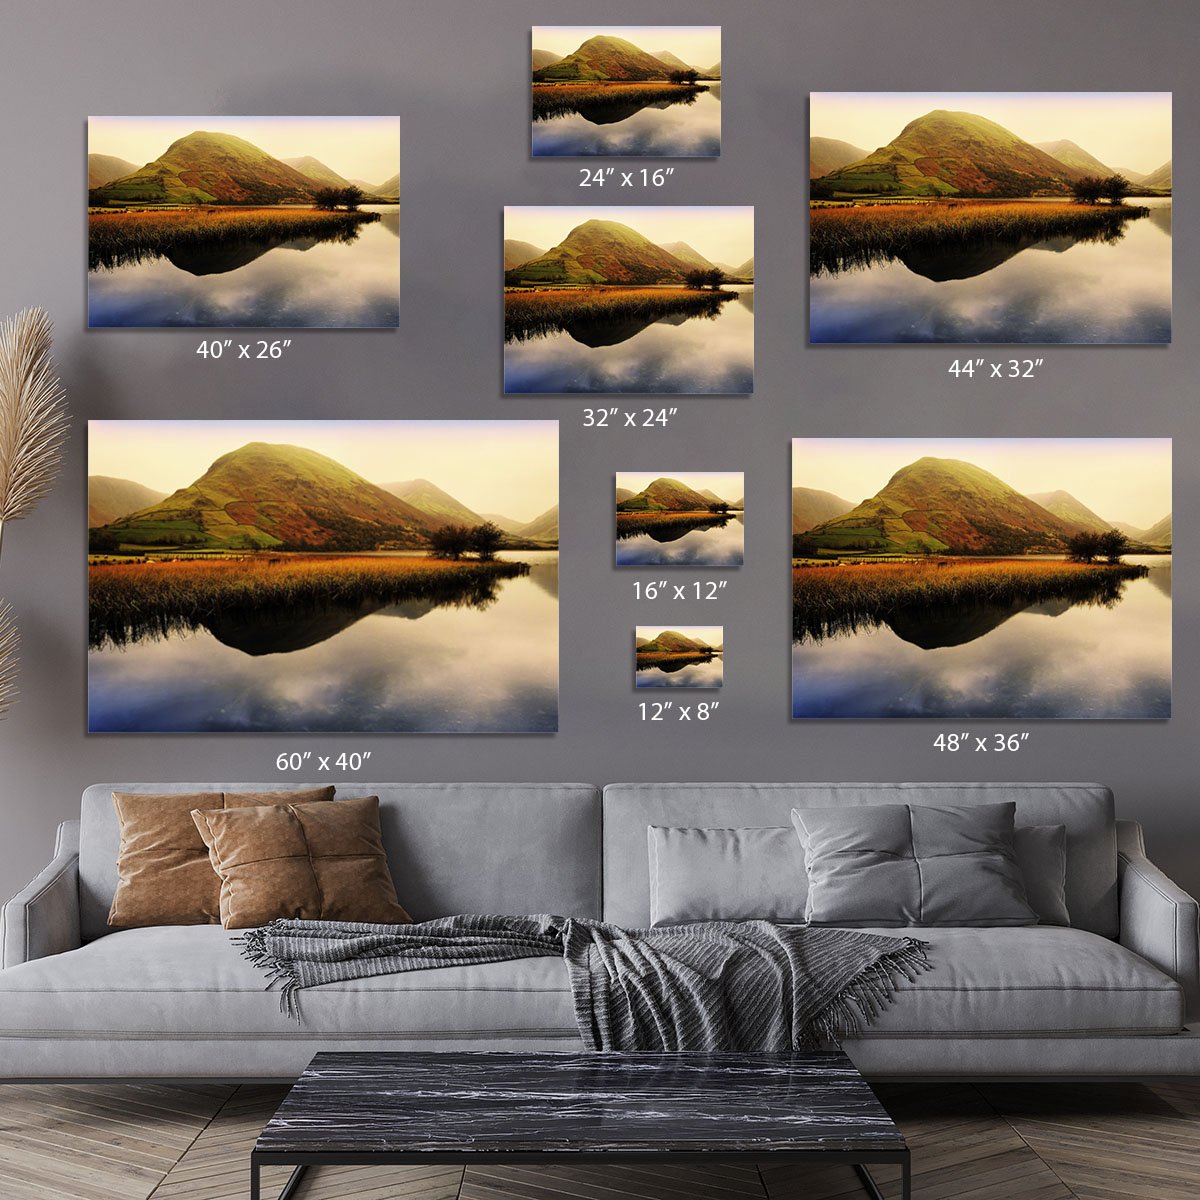 lake district Canvas Print or Poster